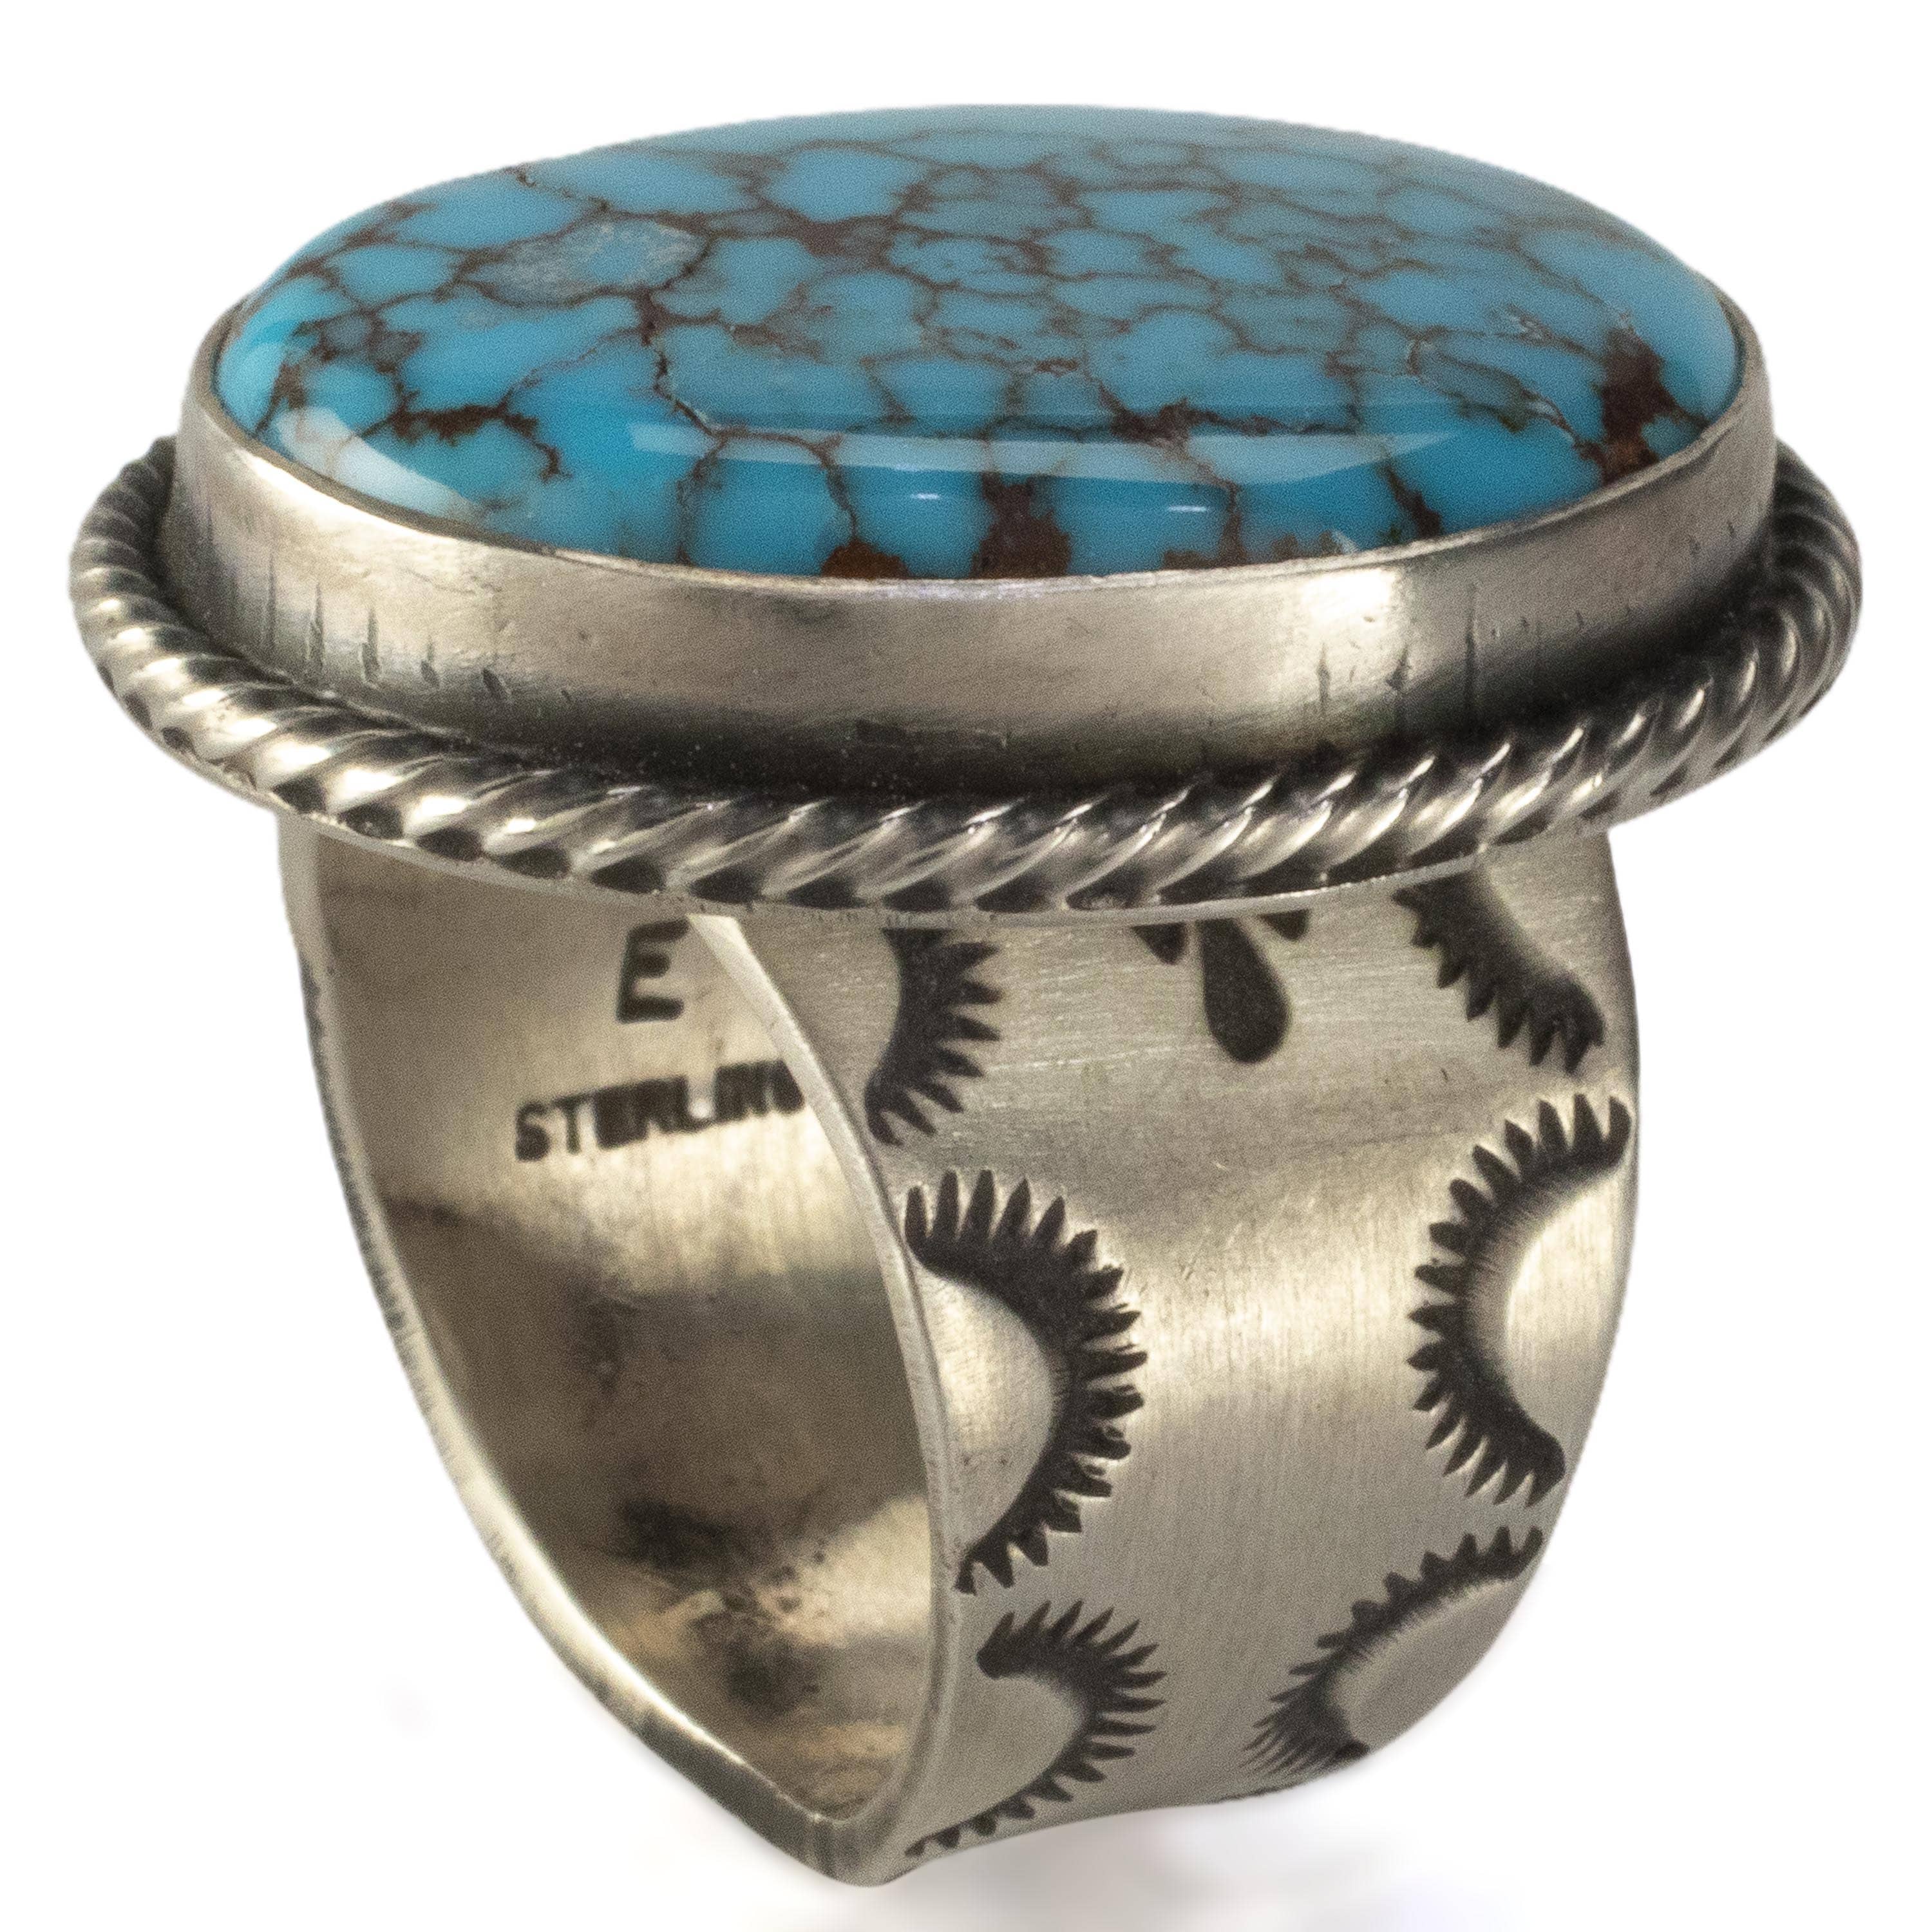 Kalifano Native American Jewelry 9 Randall Enditto Navajo Prince Turquoise USA Native American Made 925 Sterling Silver Ring NAR1400.023.9